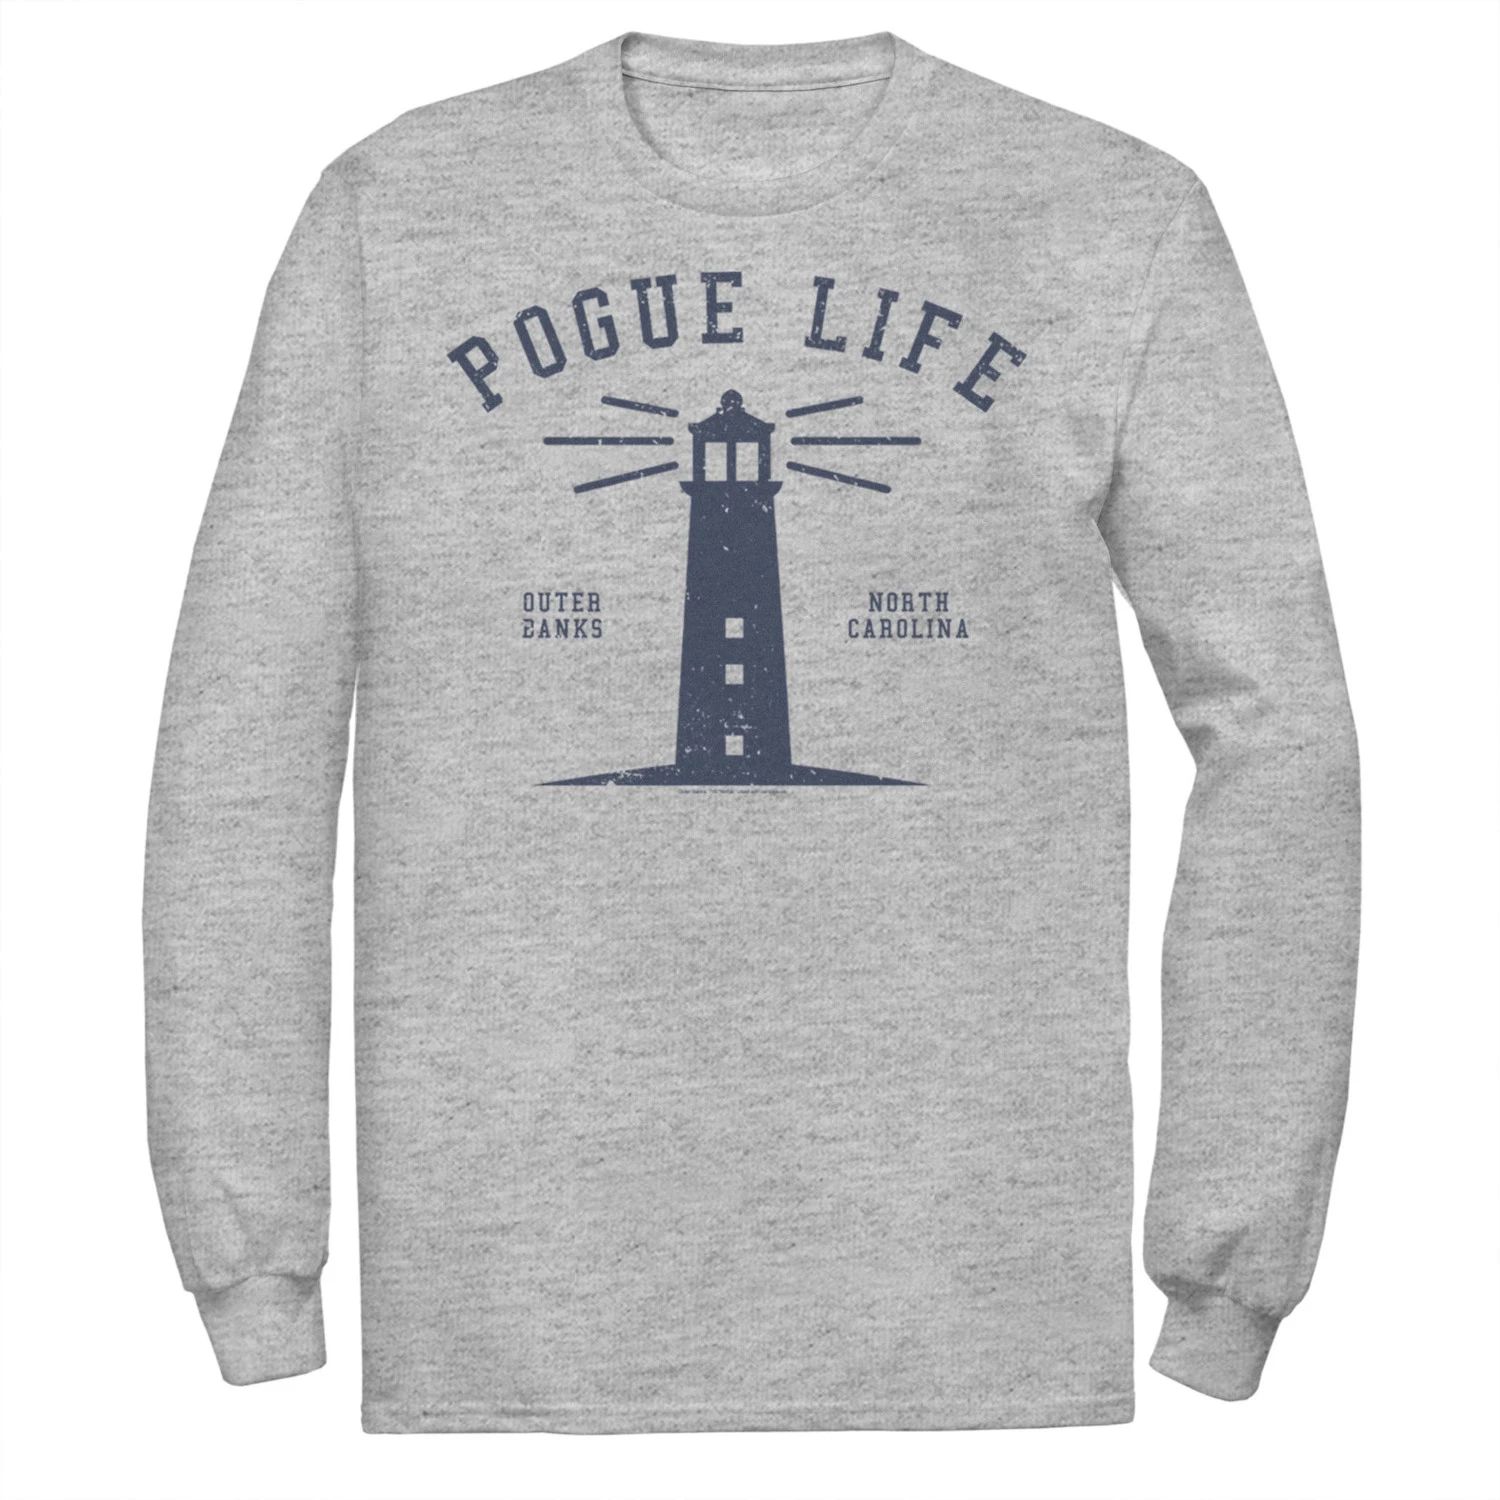 Мужская футболка Outer Banks Pogue Life Lighthouse Licensed Character мужская футболка outer banks obx pogue life licensed character